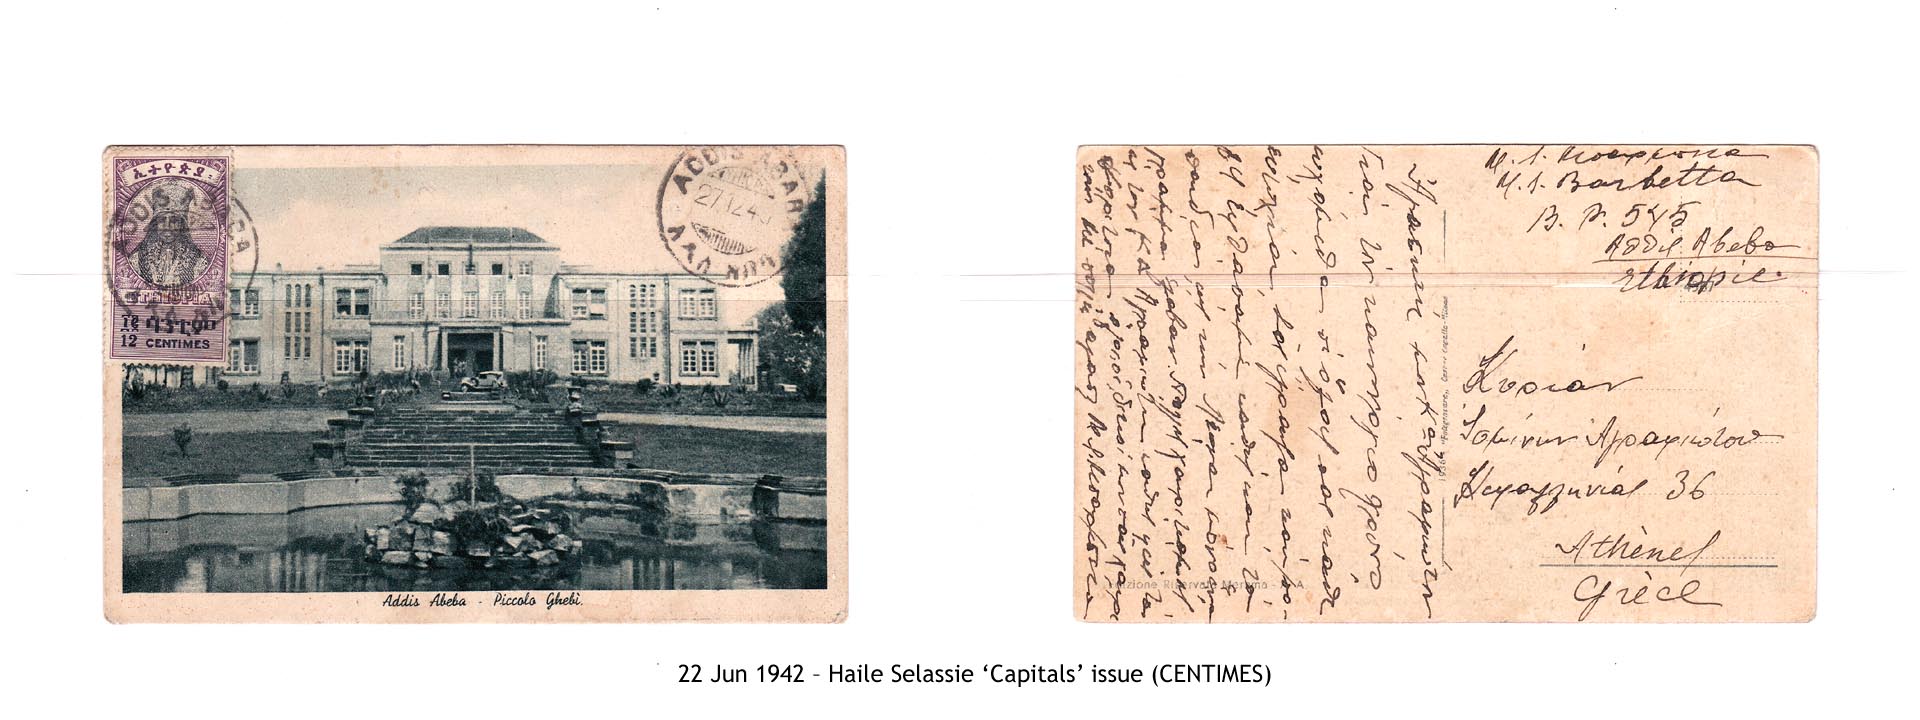 19420622 – Haile Selassie ‘Capitals’ issue (CENTIMES)